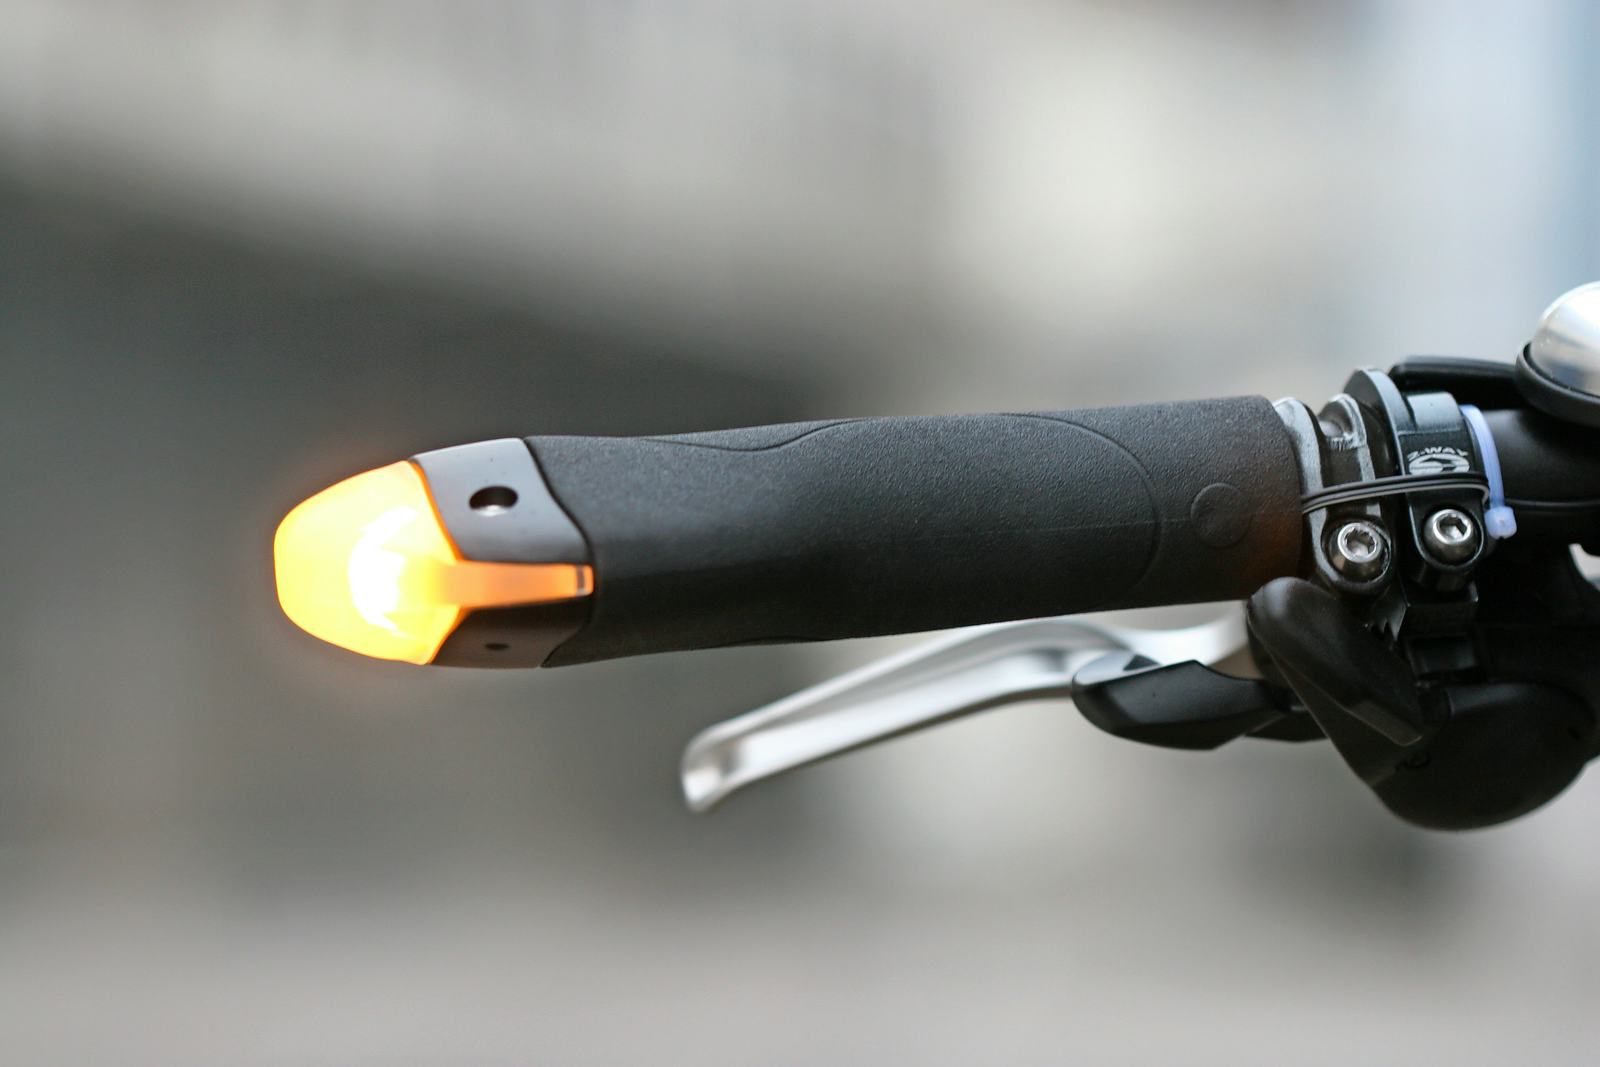 The BlinkerGrips can be installed on all standard bicycle handlebars. - Photo Swiss Small Innovations